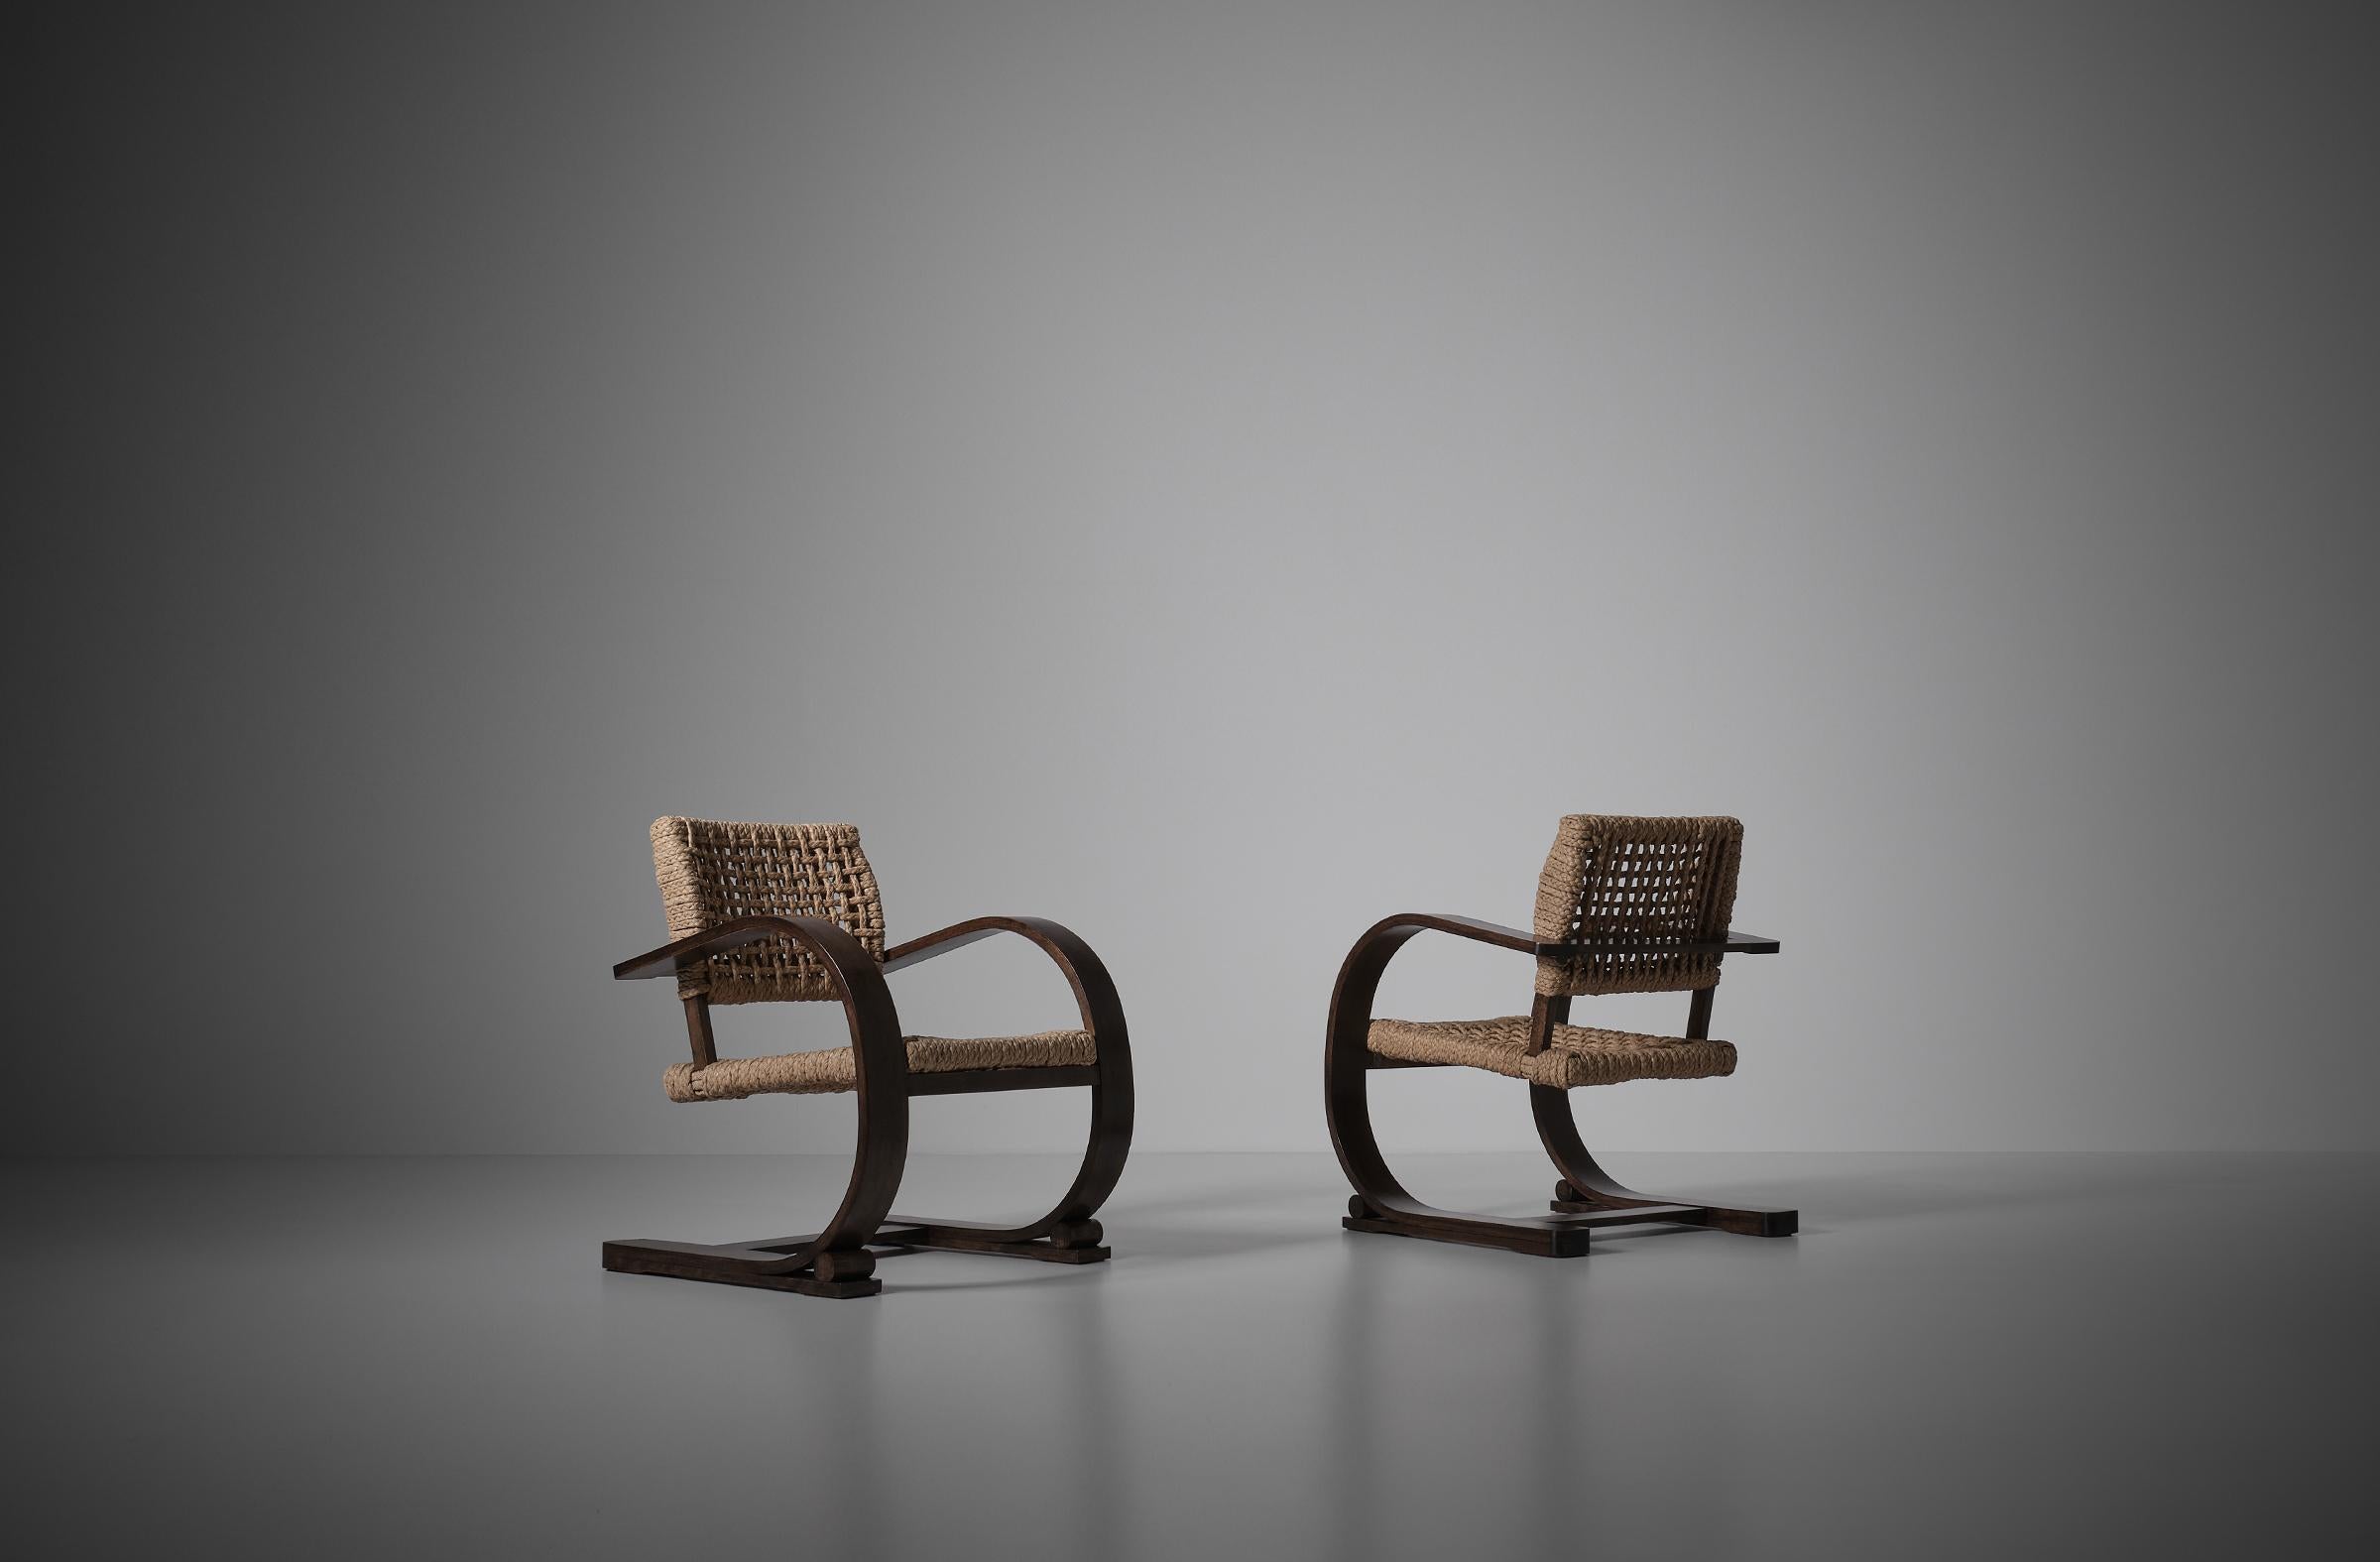 Pair of iconic armchairs by Adrien Audoux and Frida Minet, France ca. 1950. The couple became famous for their 50s French Riviera rope furniture.
Humble yet stunning design consisting two loops and a seagrass rope knotted seating part. The loops